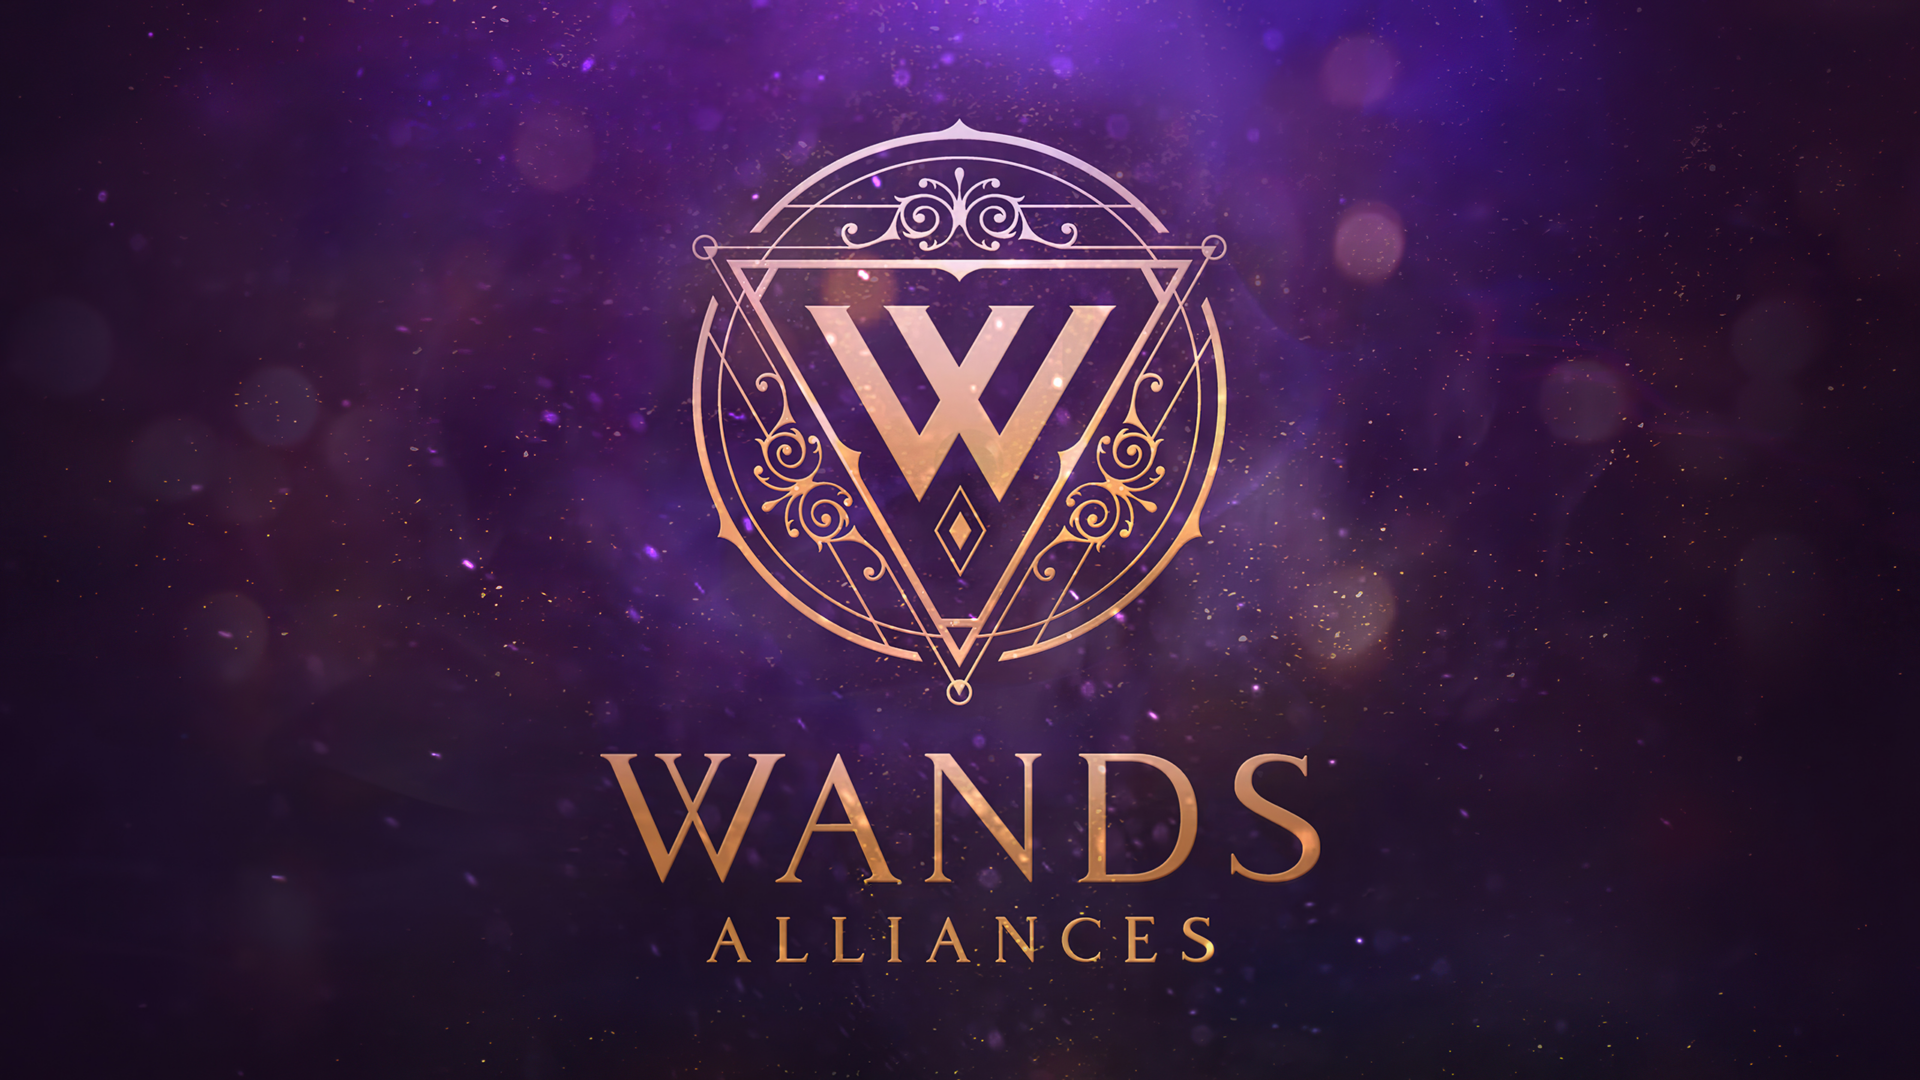 Cortopia unleashes magical mayhem in Wands Alliances, coming to Meta Quest 2